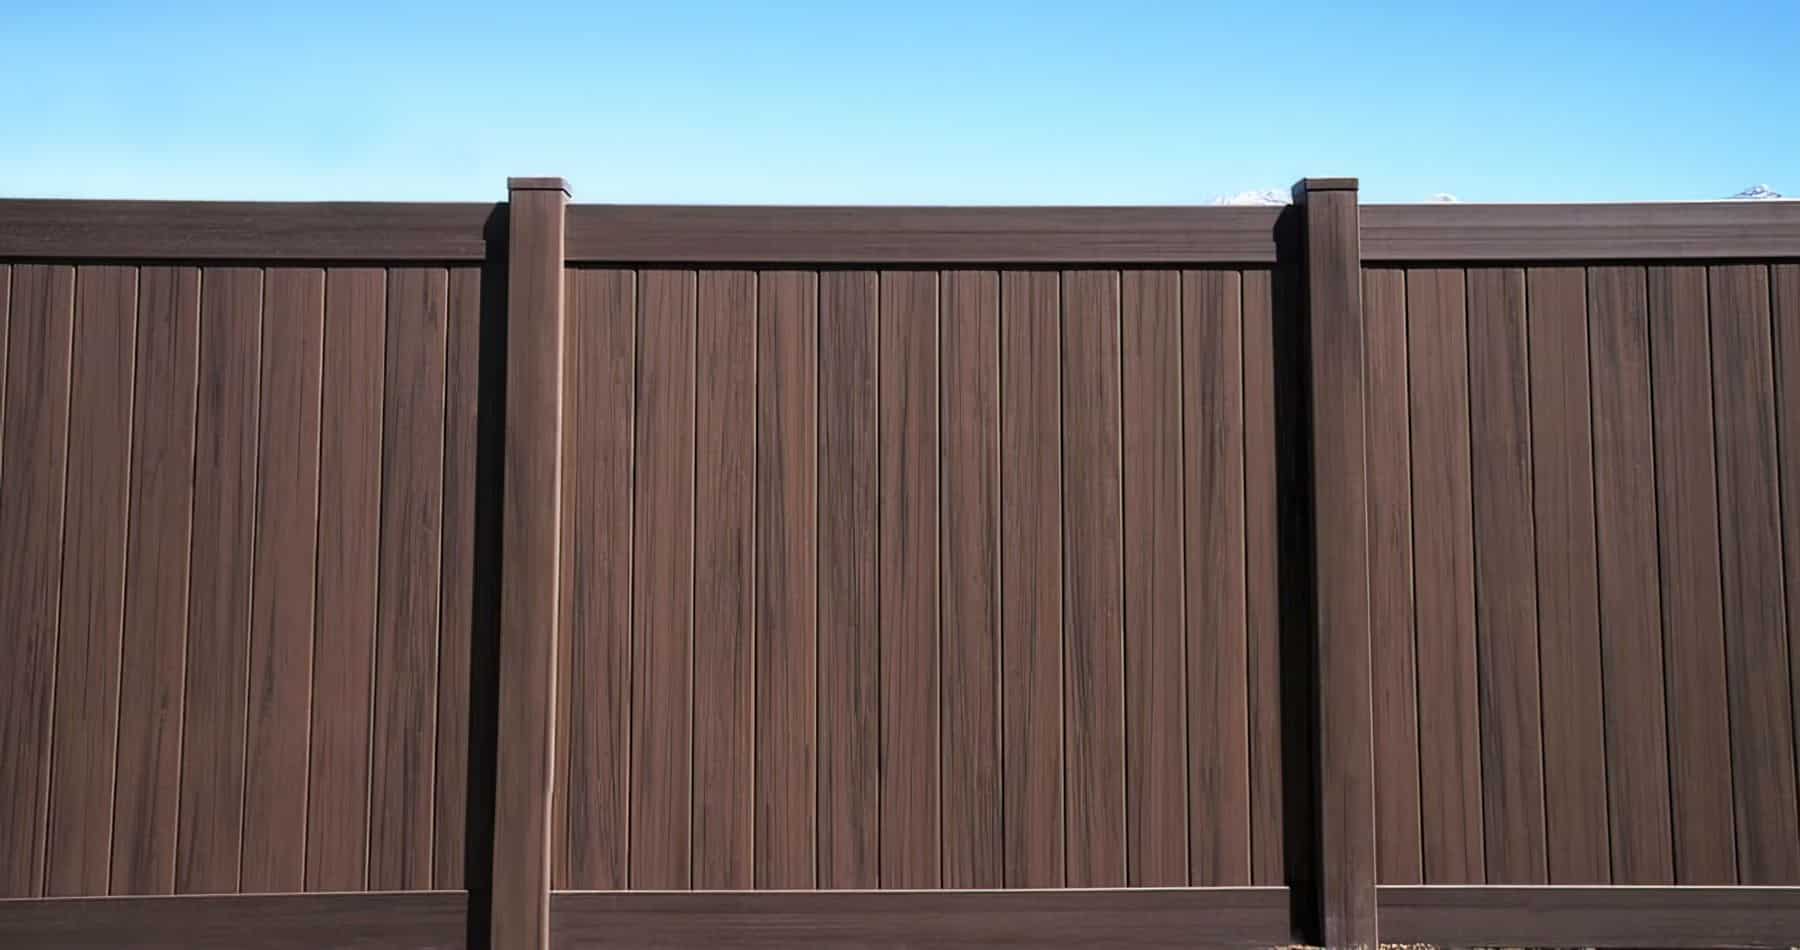 Dark sequoia vinyl fence with vertical slats and borders underneath a pale blue sky